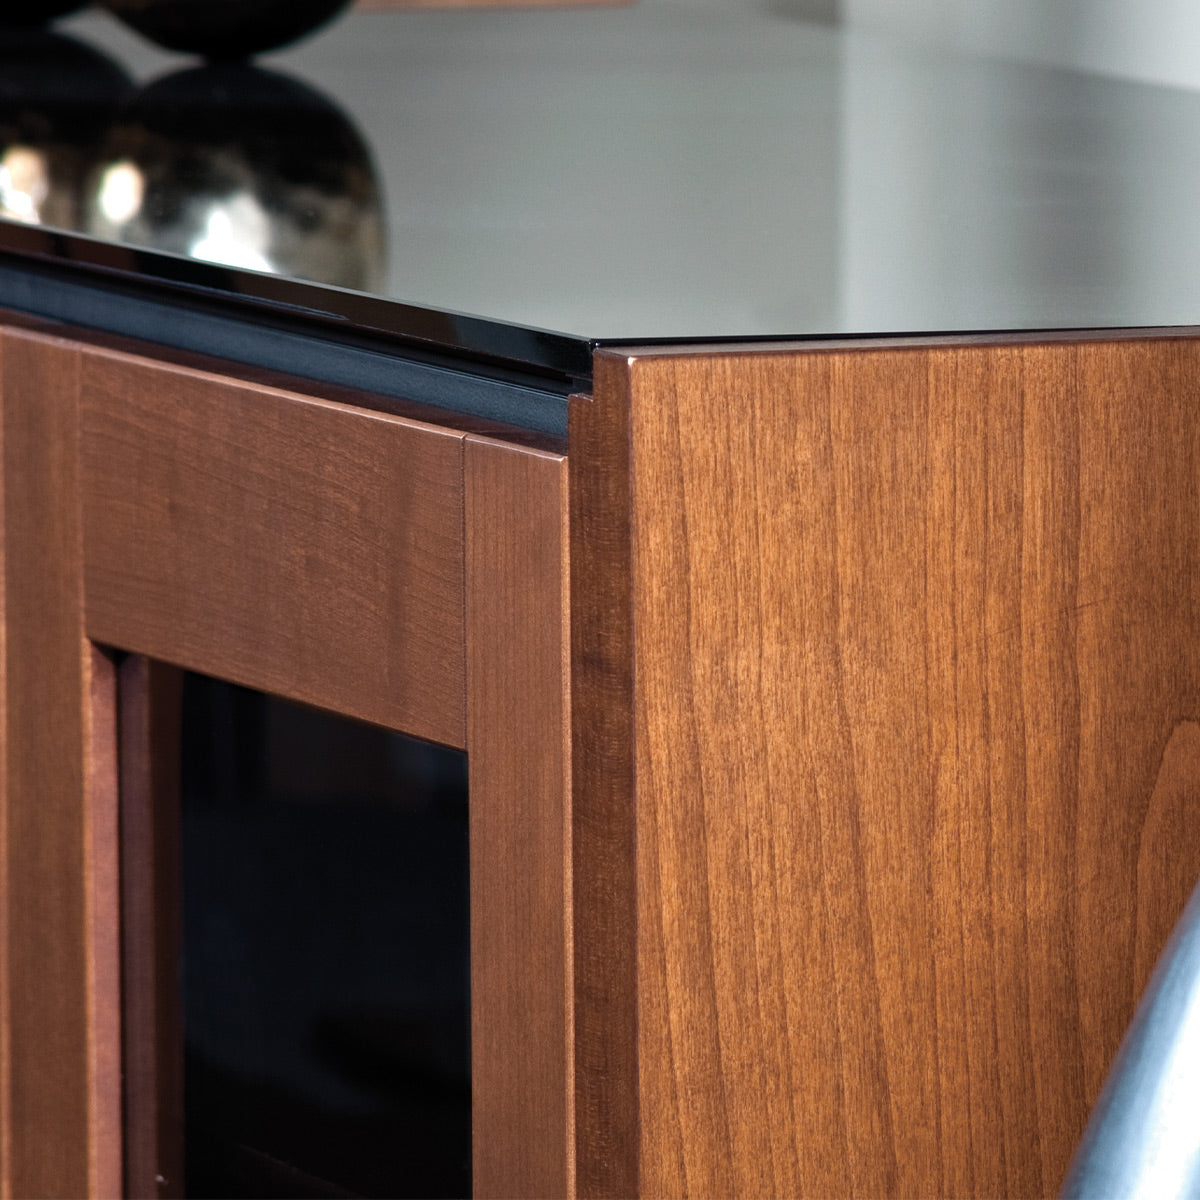 Salamander Chameleon Collection Corsica 329 Twin Speaker Integrated Cabinet (Thick Cherry with Black Glass Top)